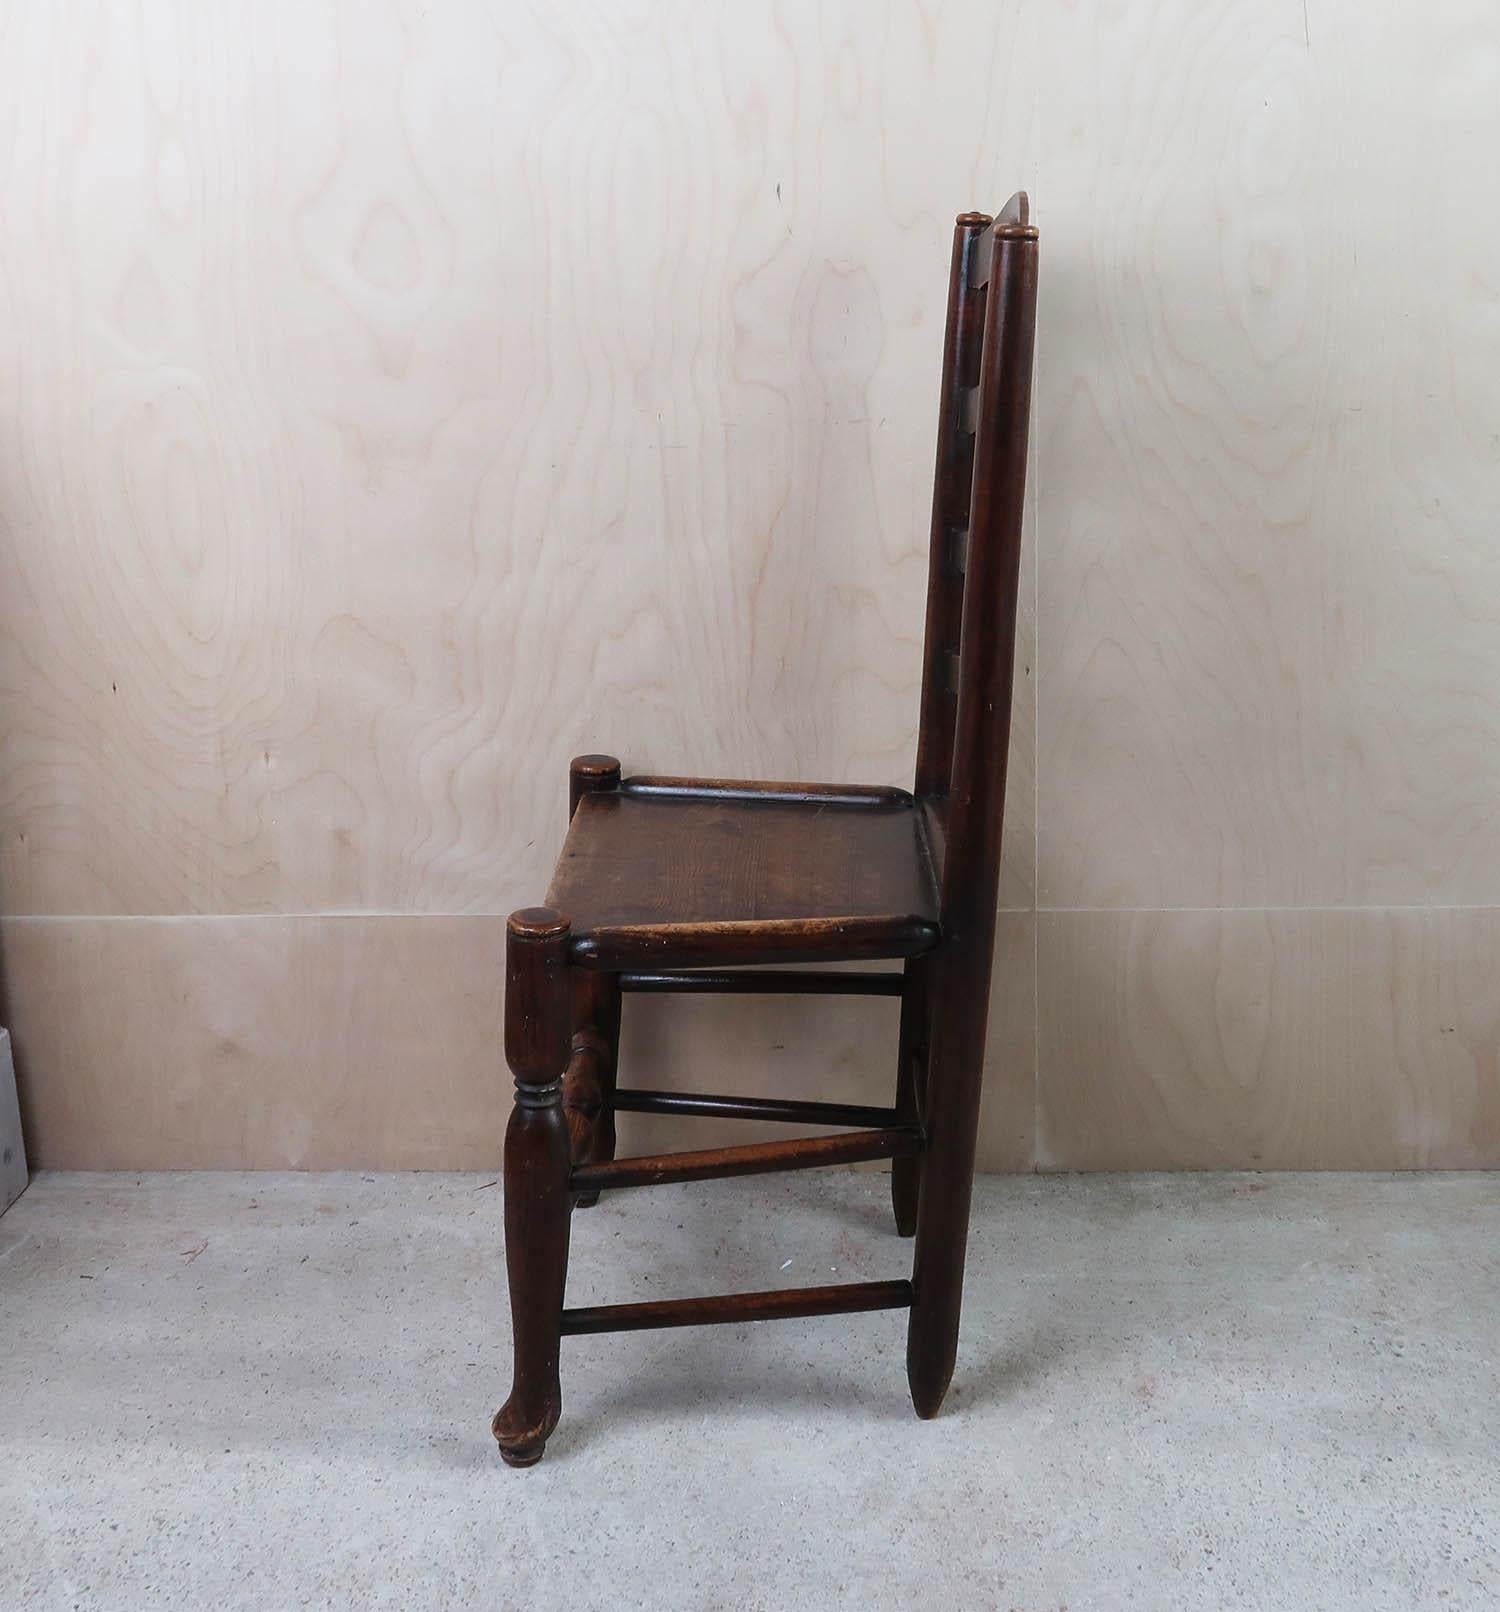 Near Pair of Antique Welsh Country Ladder back Chairs. C.1800 im Angebot 1